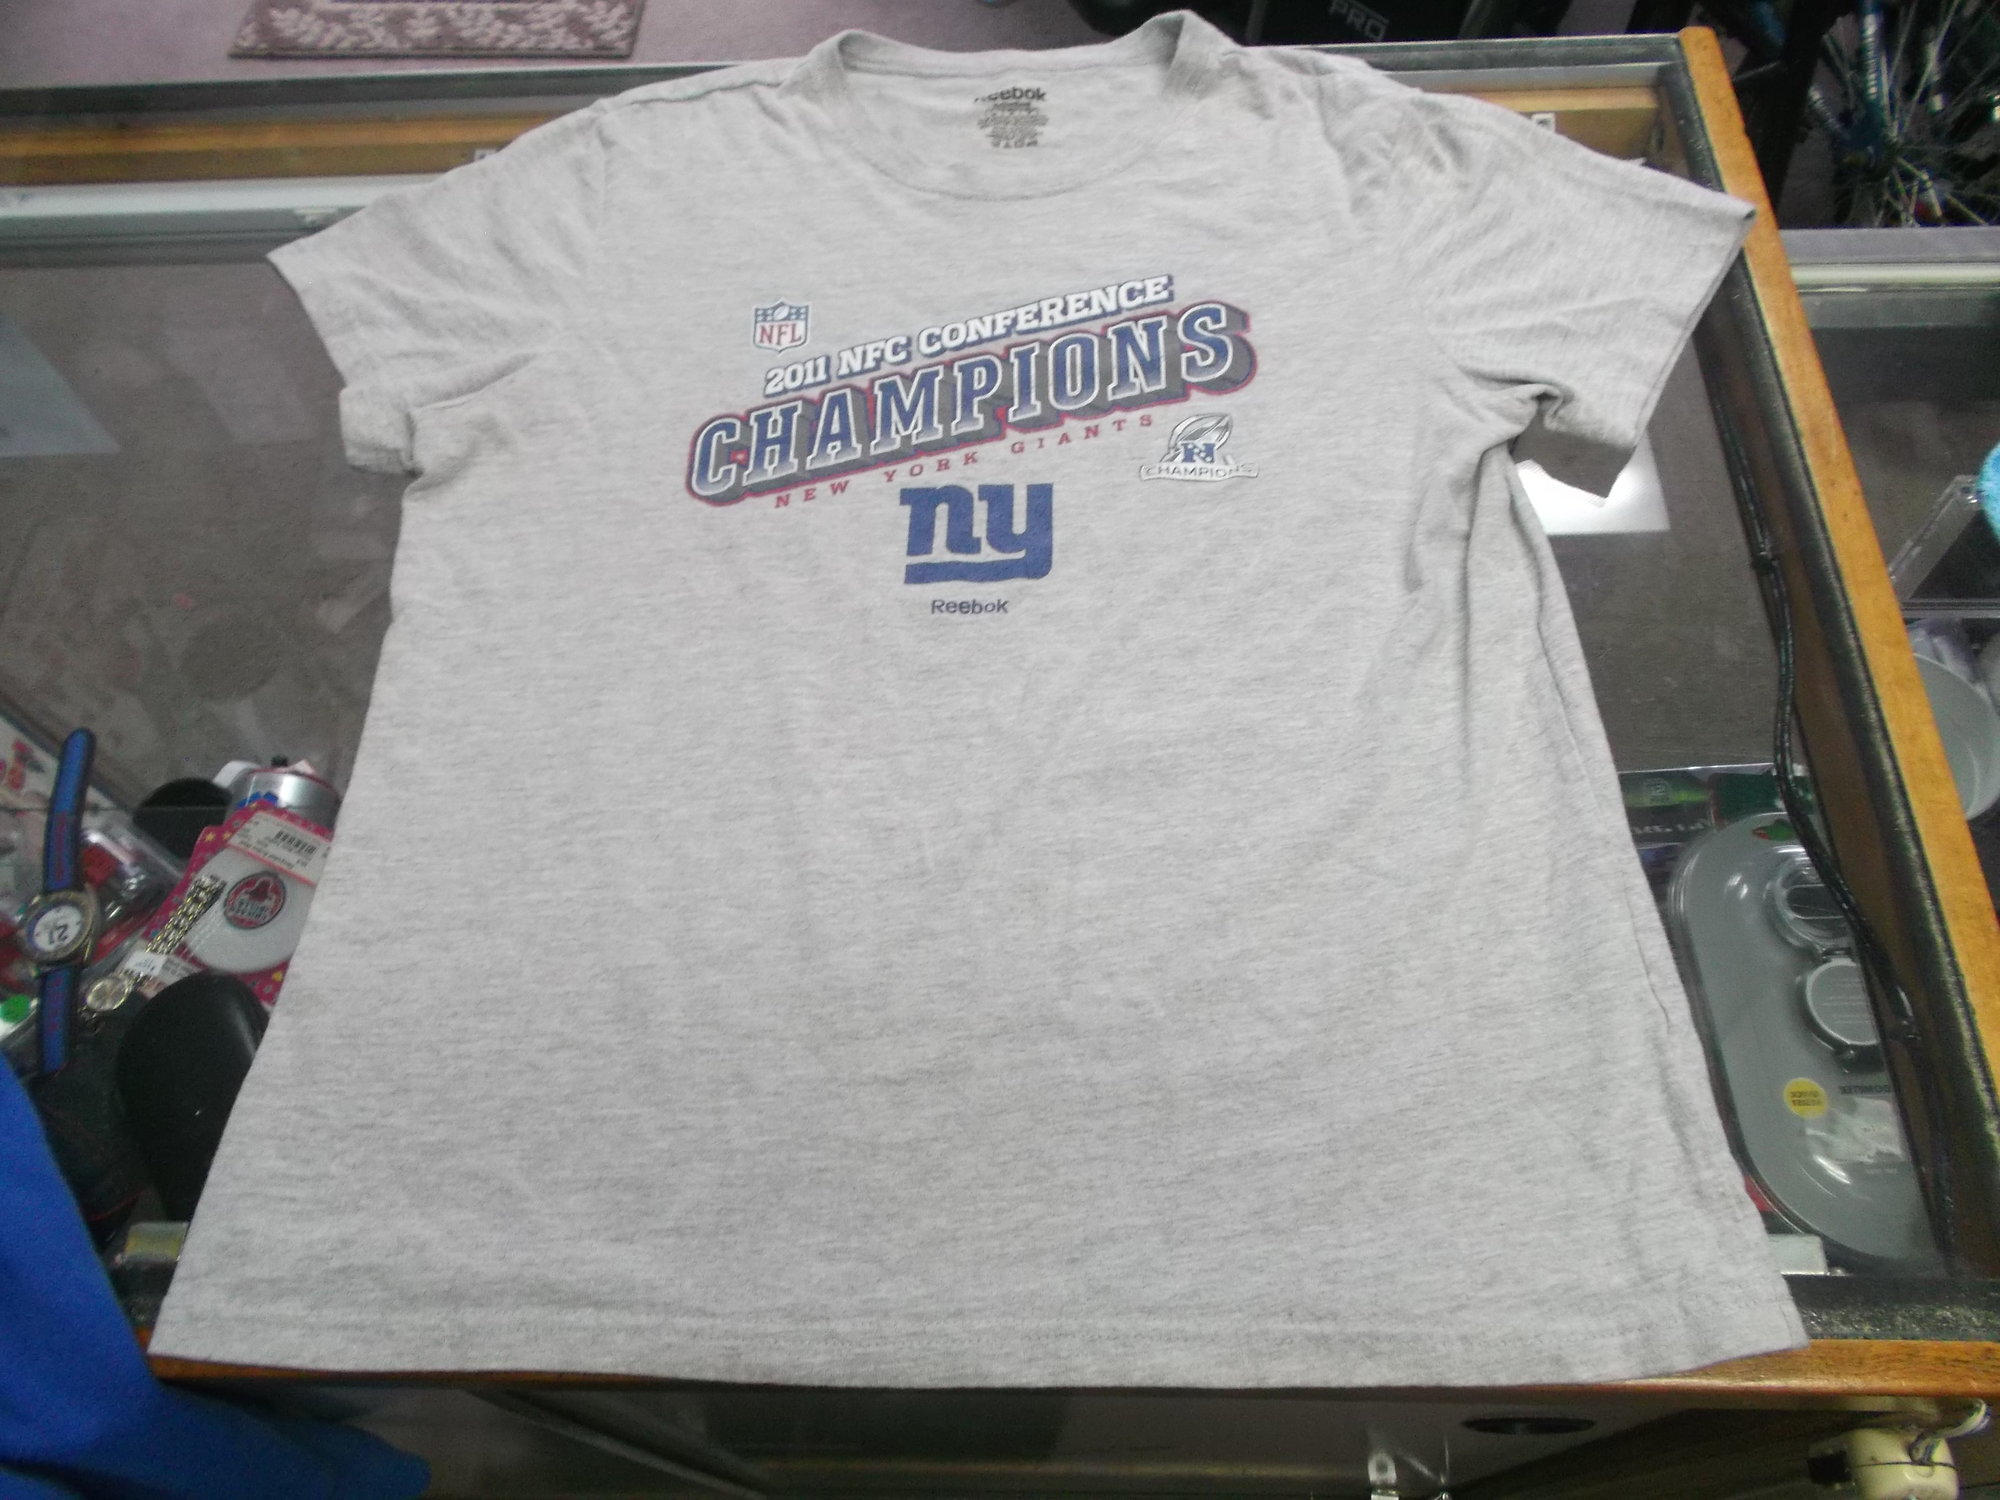 New York Giants 2011 Champions Women's Reebok Shirt Size Medium Gray #9476
Rating:   (see below) 4 - Fair Condition
Team: New York Giants
Event: 2011 NFC Champions 
Brand: Reebok
Size: Medium - Women's(Measured Flat: Across chest 19\"; Length 24\") 
Color: Gray
Style: short sleeve screen pressed Logo
Material: 93 Cotton 7 Polyester
Condition: - Fair Condition - wrinkled; Logo is faded and discolored; Significant pilling and fuzz; Material feels coarse; Definite signs of use; No stains rips or holes (Please use photos to see the condition details) 
Shipping cost: $3.37  
Item #: 9476